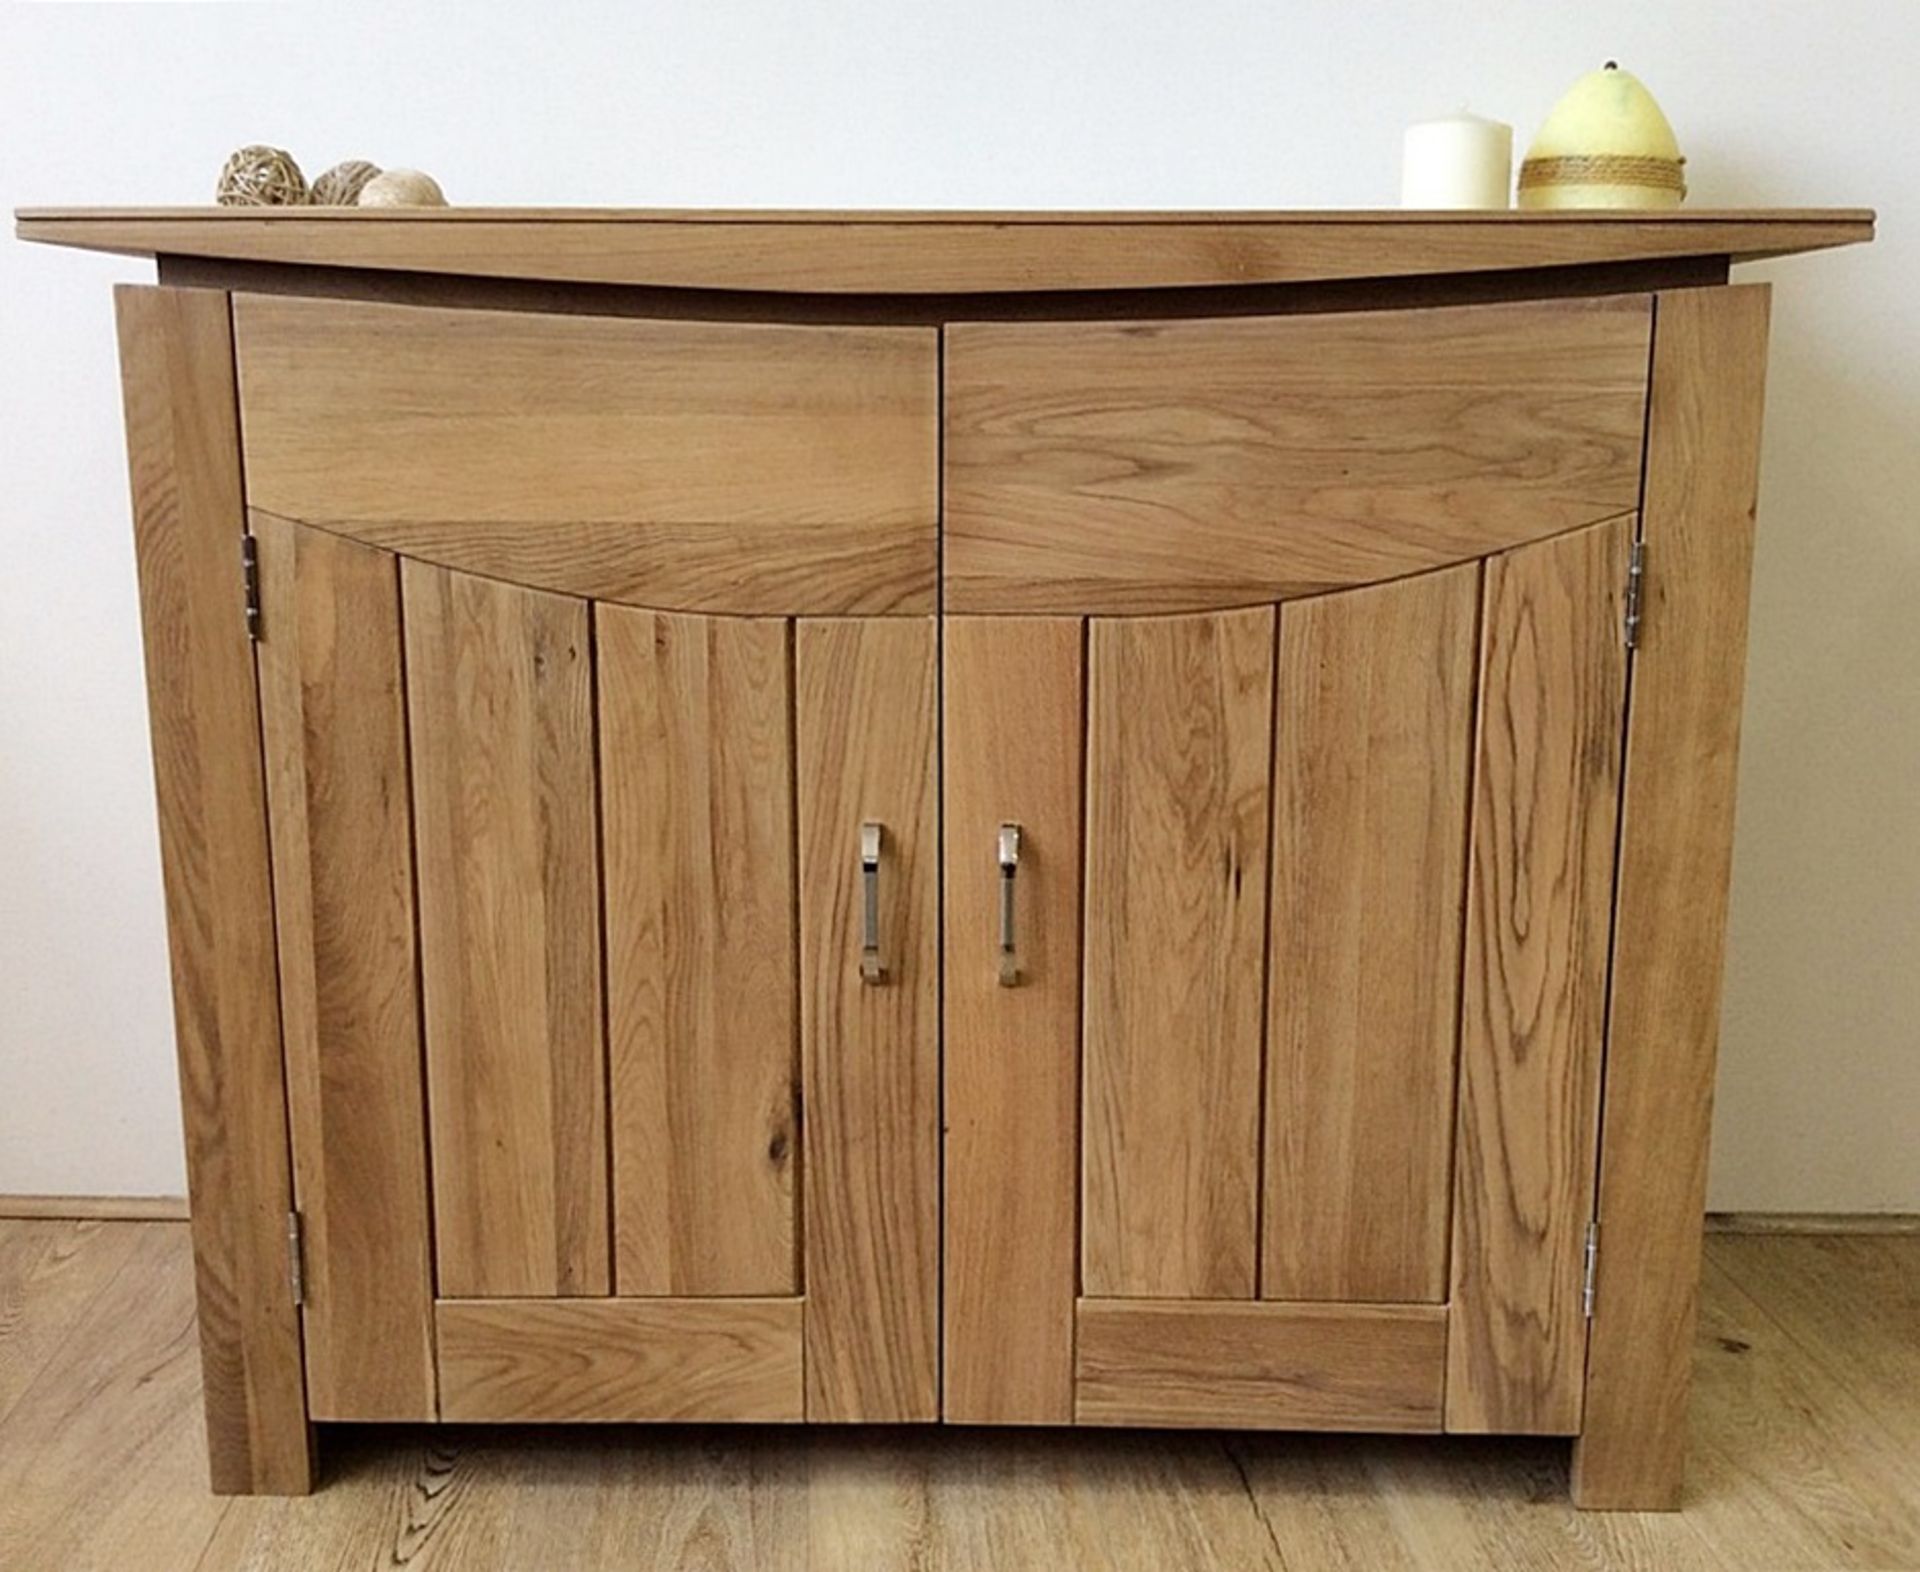 1 x Matlock Solid Oak 2 Door Sideboard - MADE FROM 100% SOLID OAK - CL112 - New, Ready Built & Boxed